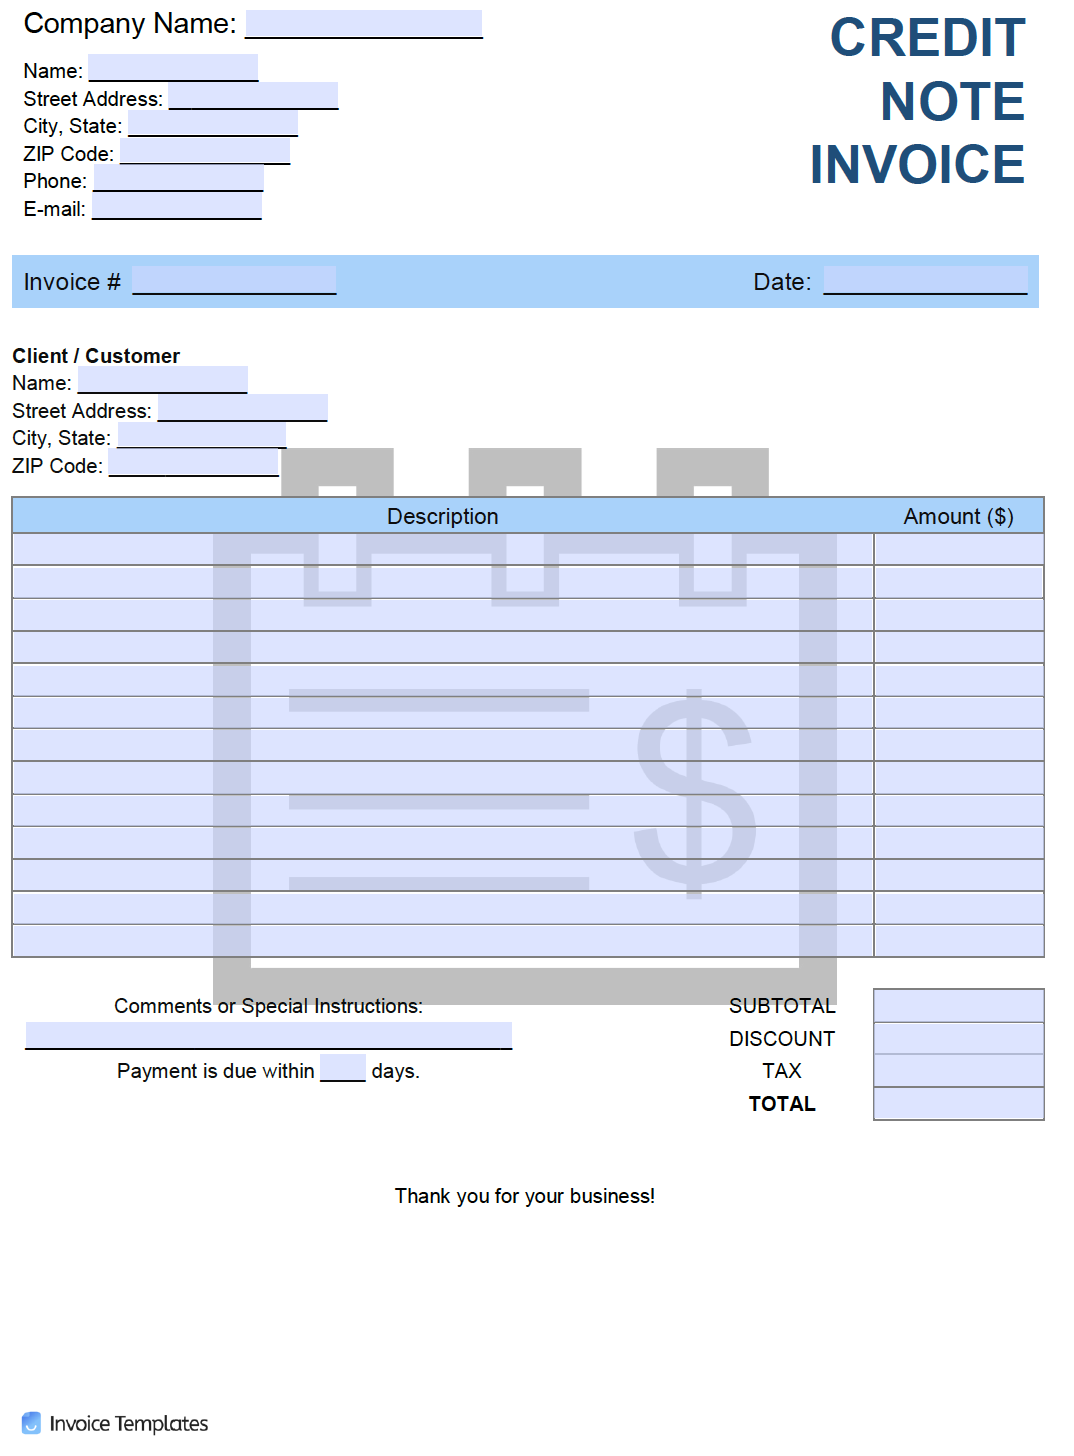 Free Credit (Note) Invoice Template  PDF  WORD  EXCEL For Credit Note Example Template